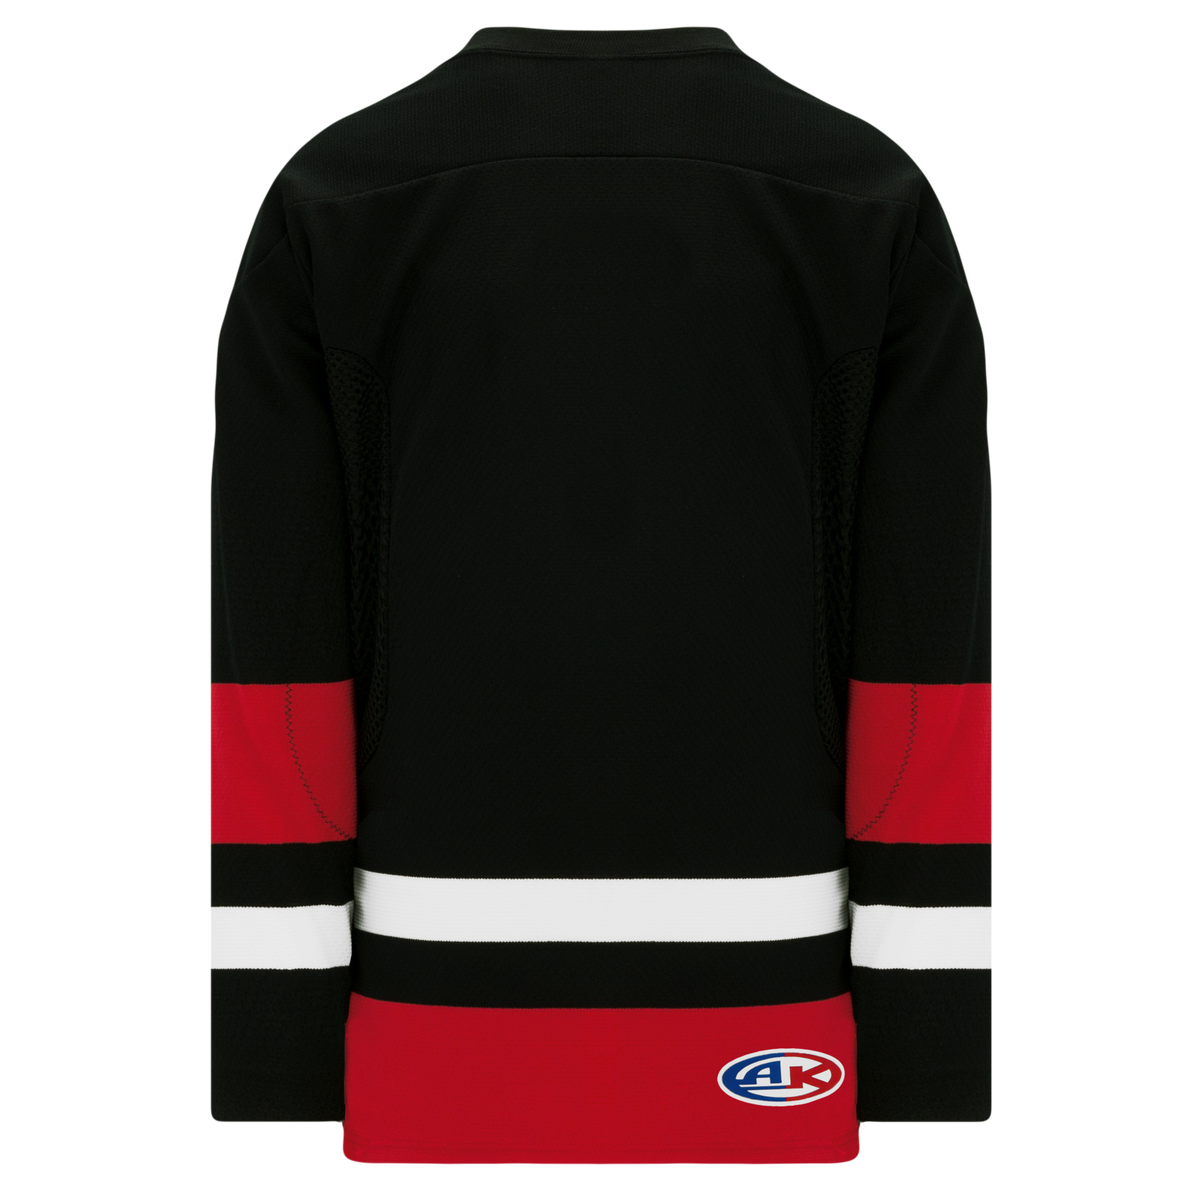 Buy Athletic Knit Pro Series Hockey Jersey with Lace Neck Online